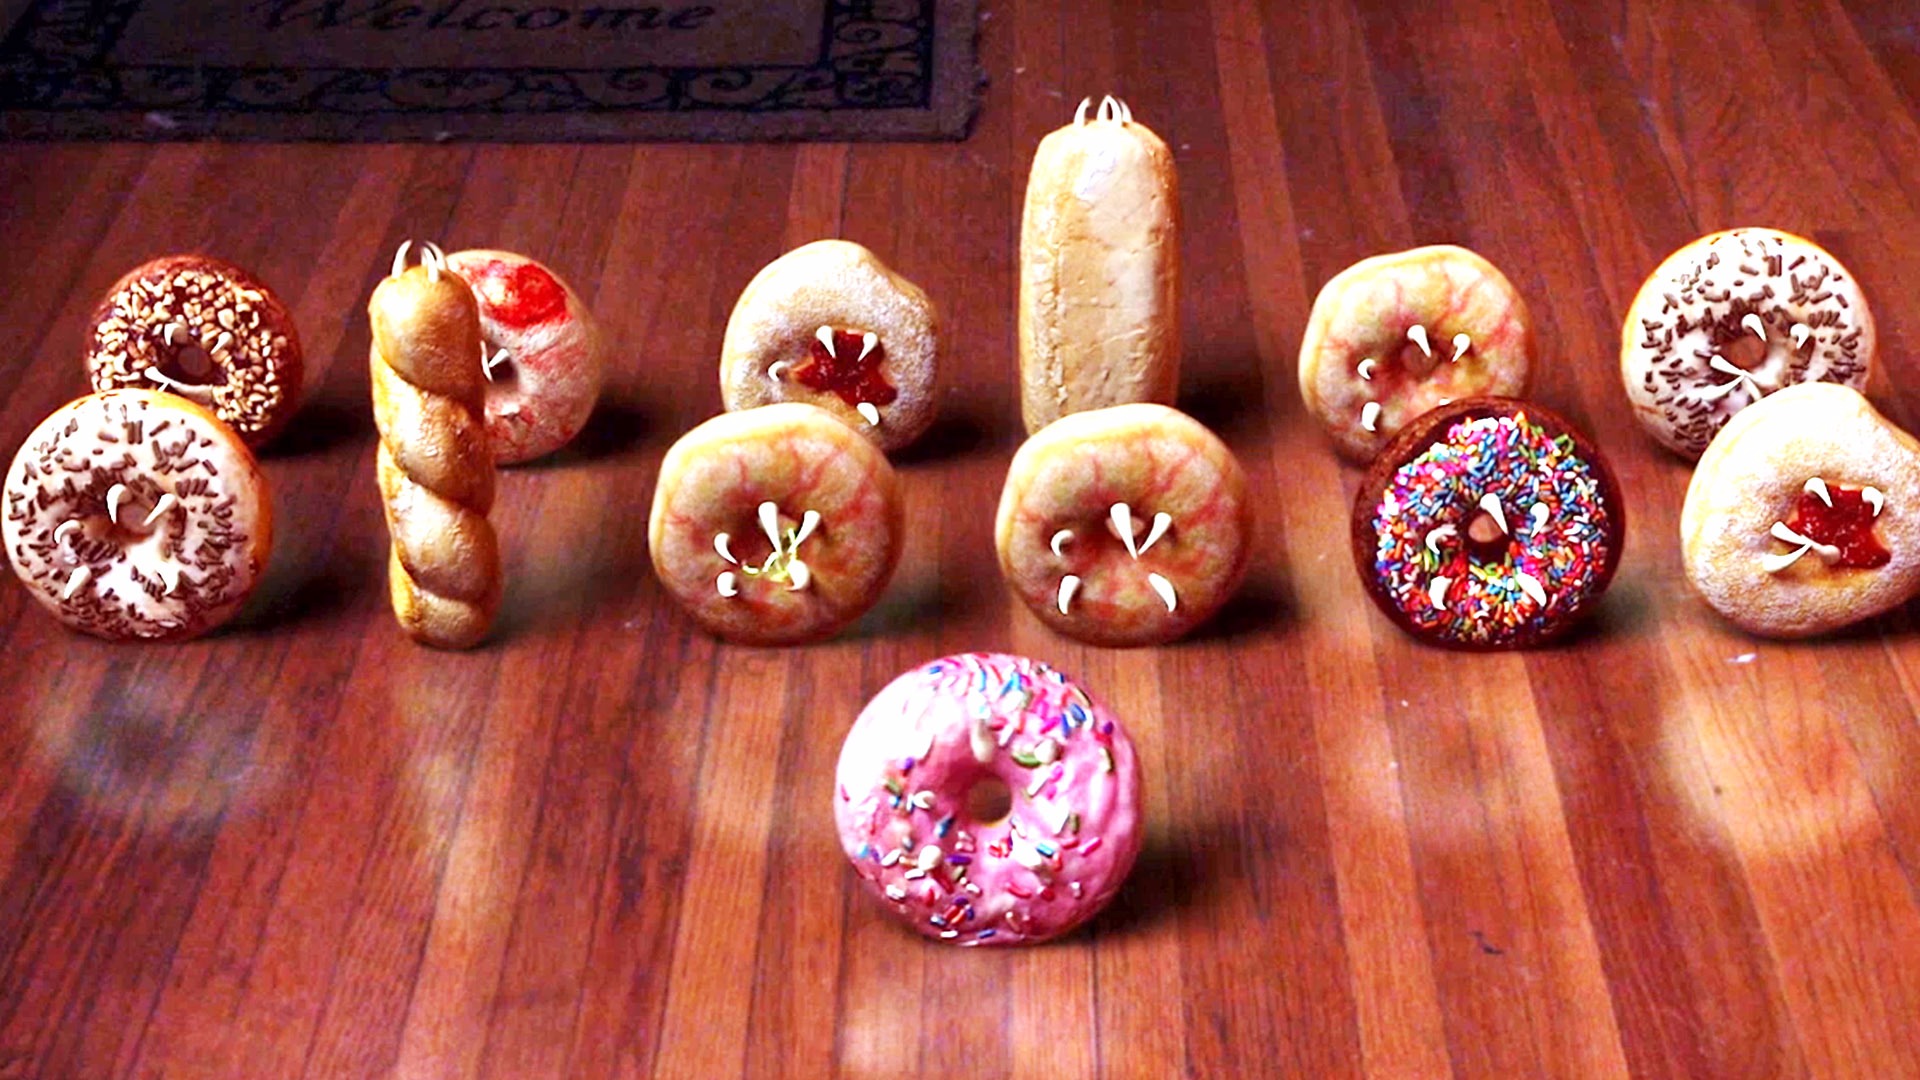 Attack of the Killer Donuts: Attack of the Killer Donuts 